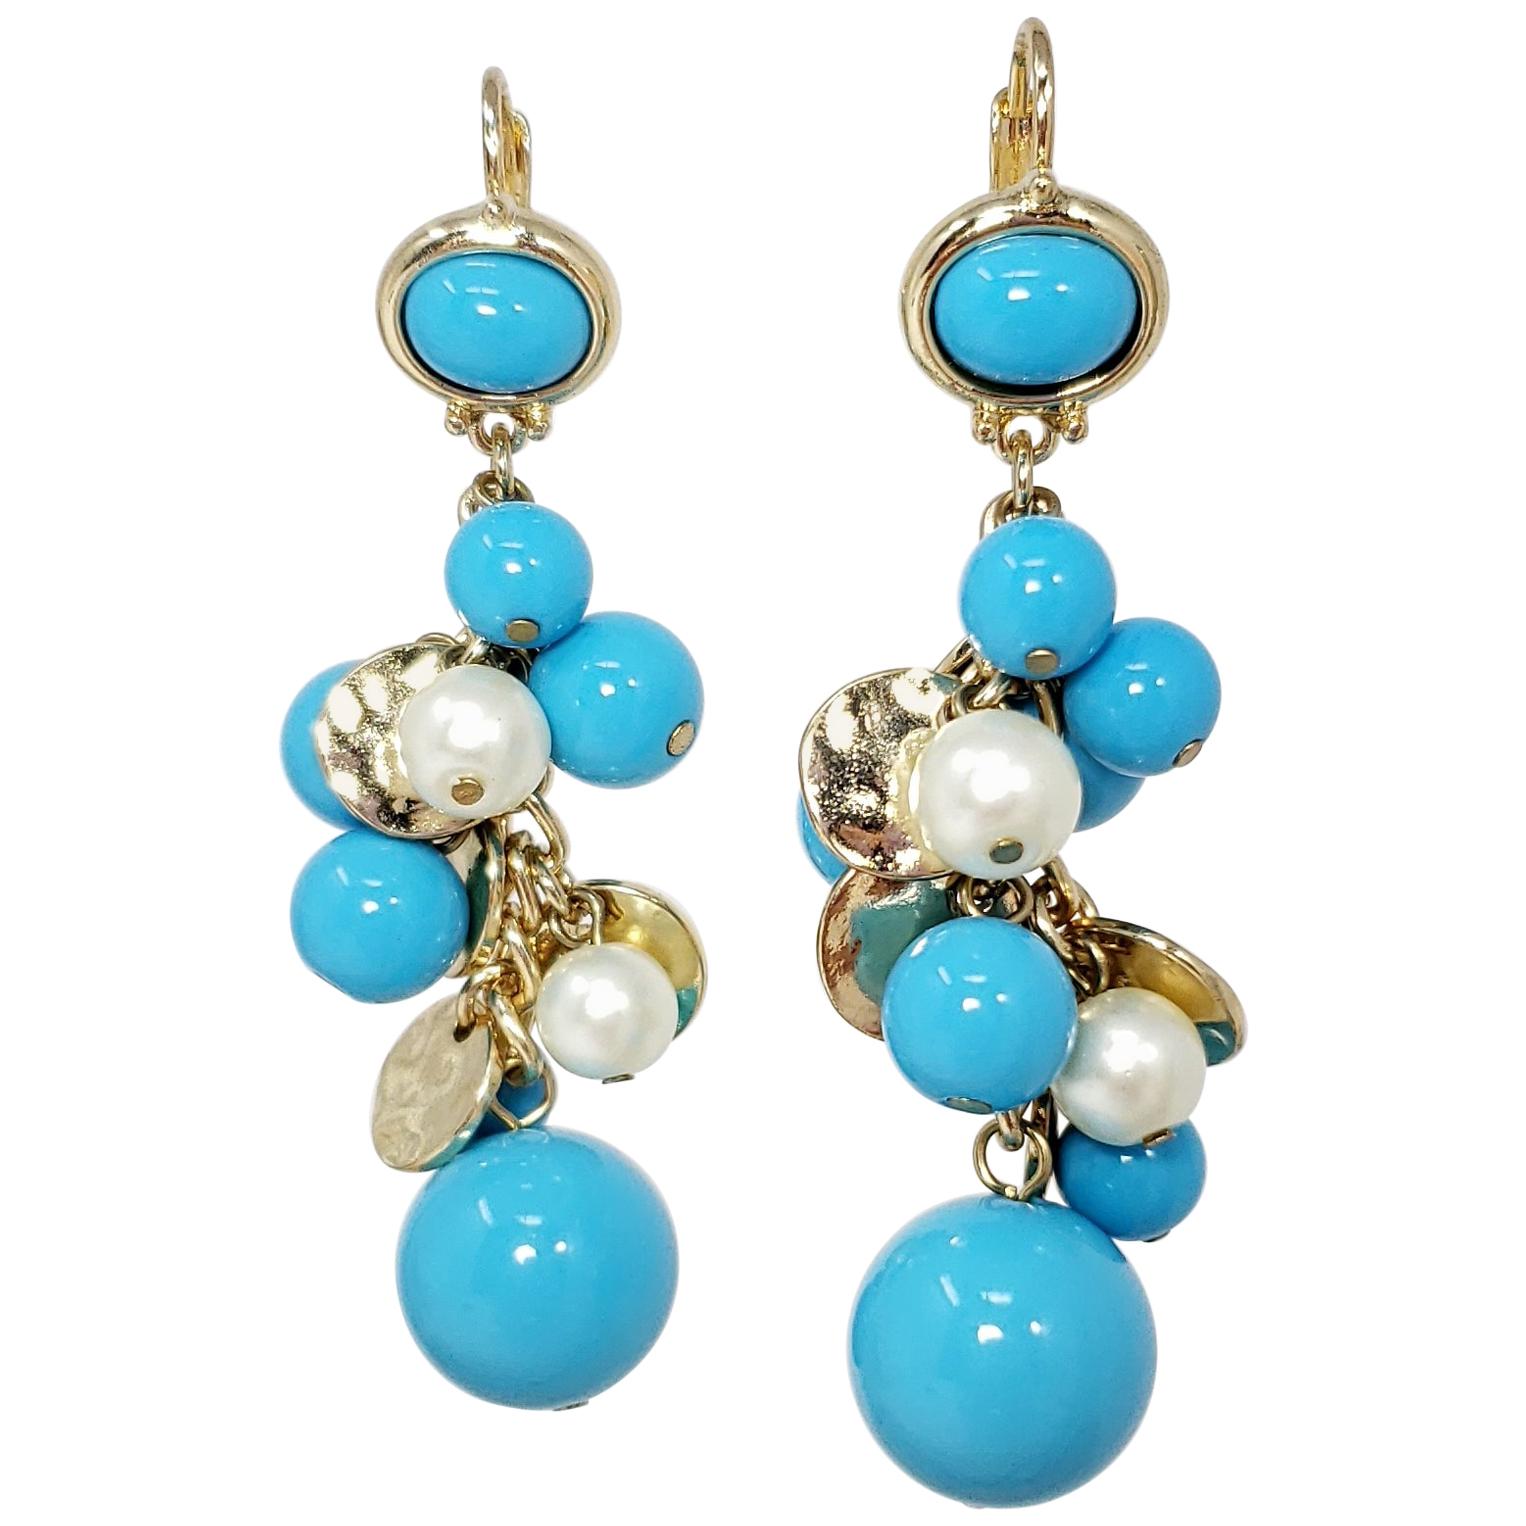 Kenneth Jay Lane KJL Dangling Cluster Turquoise and Faux Pearl Bead Earrings